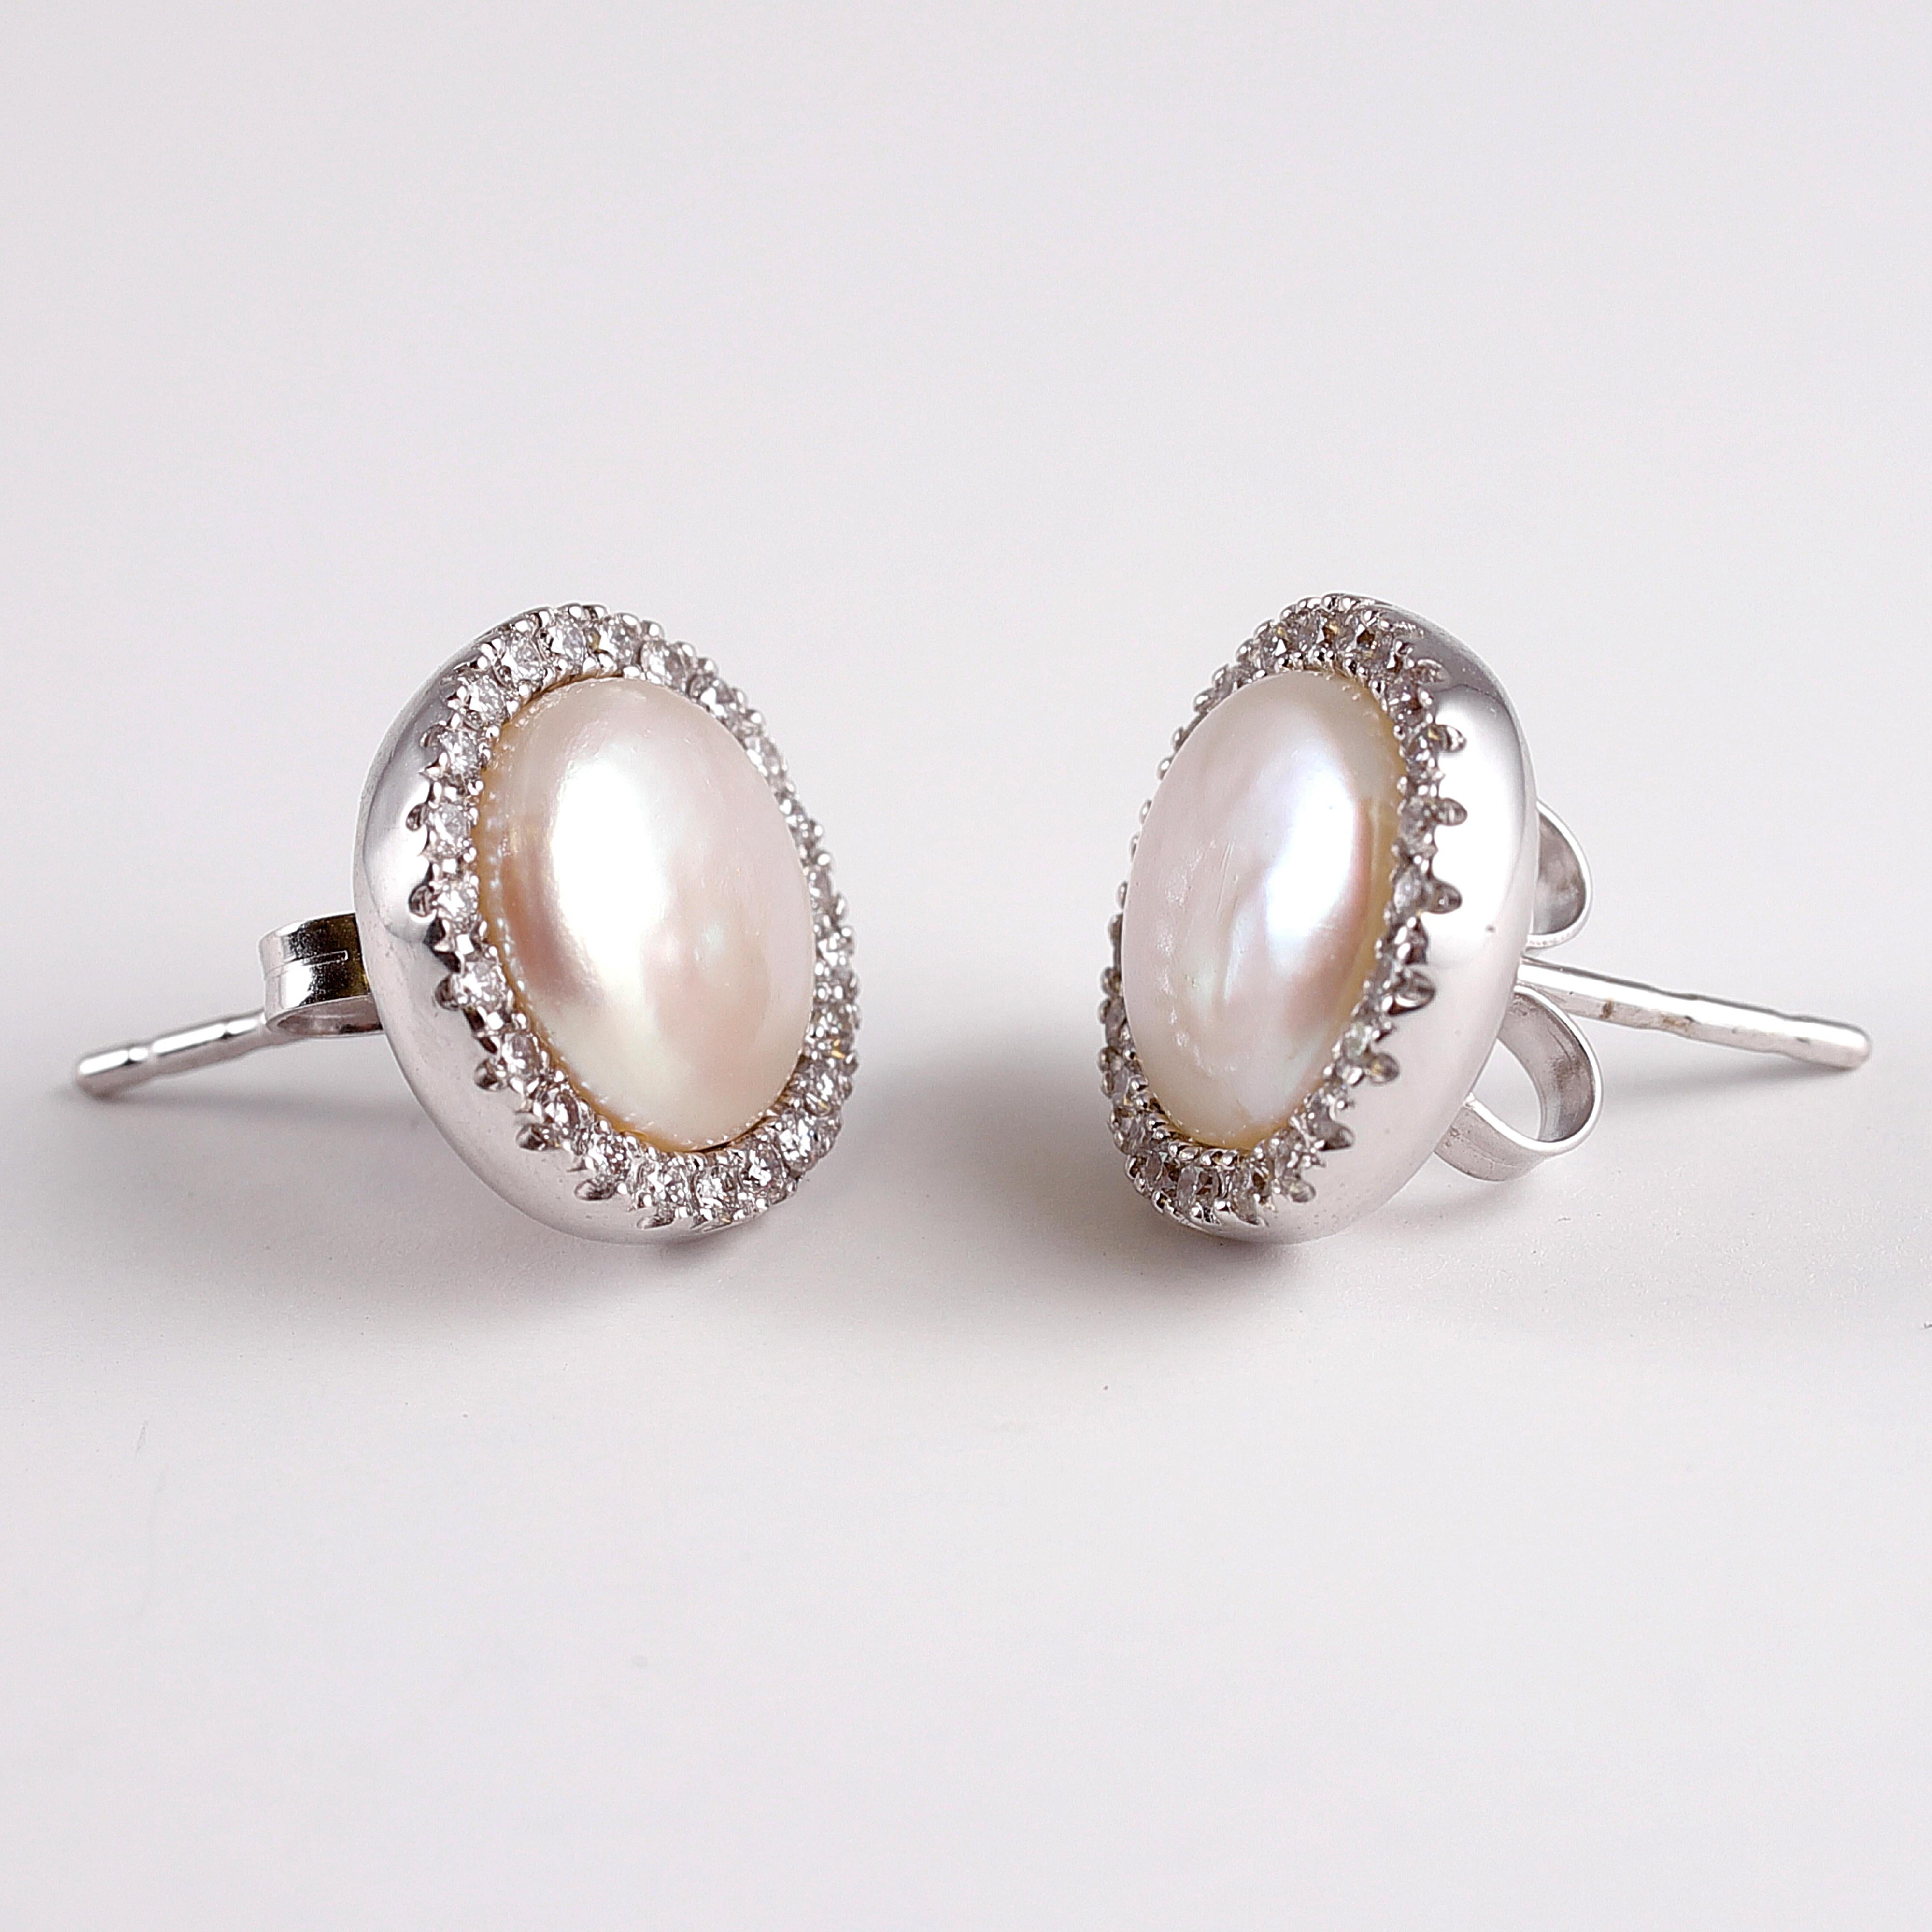 Cultured freshwater pearls with diamond halos in 18 karat white gold by Yvel.  These timeless earrings can be worn with so many things!